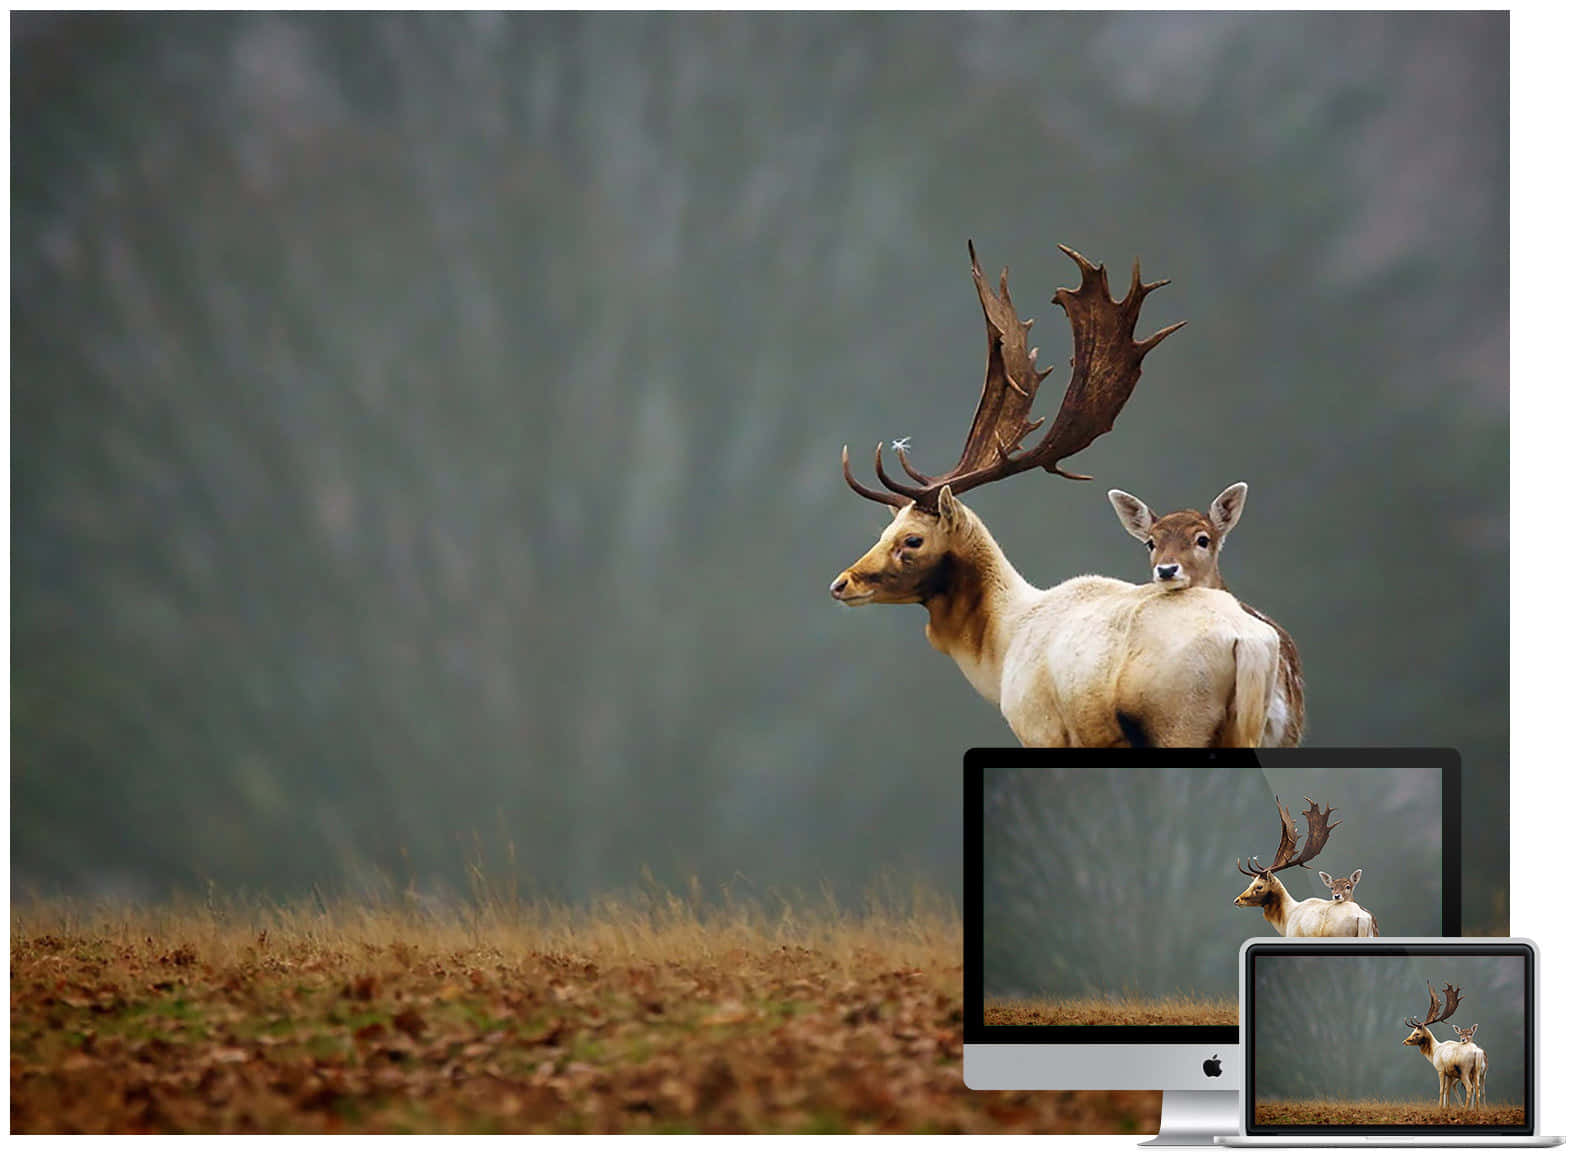 Majestic wildlife scene with various animals in their natural habitat Wallpaper